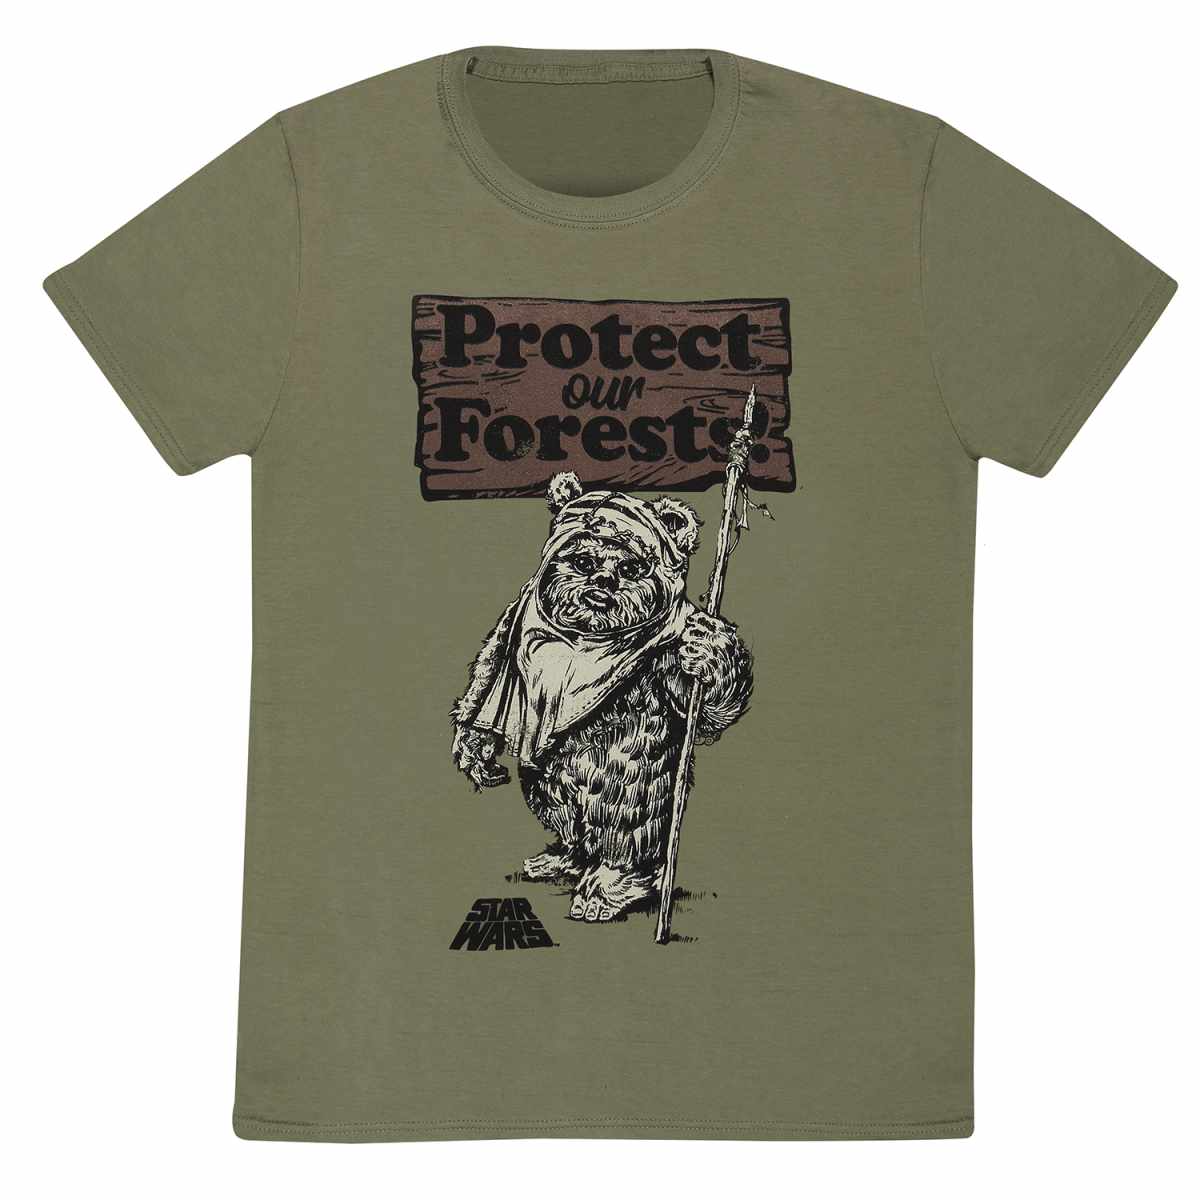 Star Wars Protect Our Forests T-Shirt